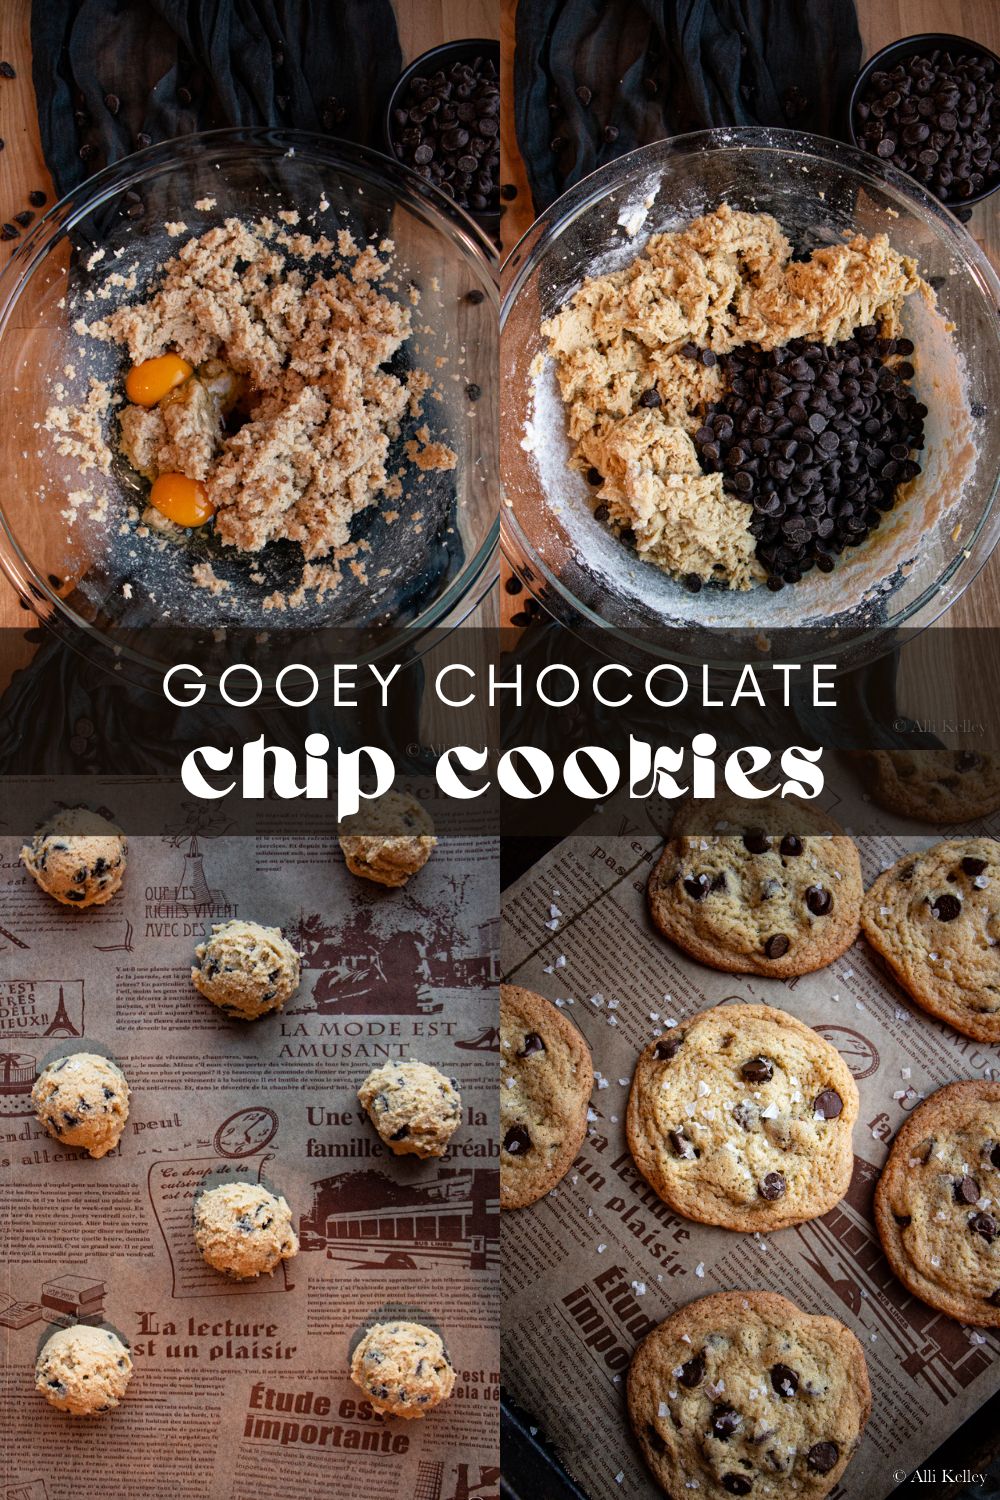 These buttery chocolate chip cookies are something special! Sweet chocolate chips wrapped in a buttery crumb, these cookies will leave your taste buds begging for more! Nothing can compare to that first bite - the subtle crunch and chewy texture of the cookie, full of delicious chocolate chips is truly irresistible.